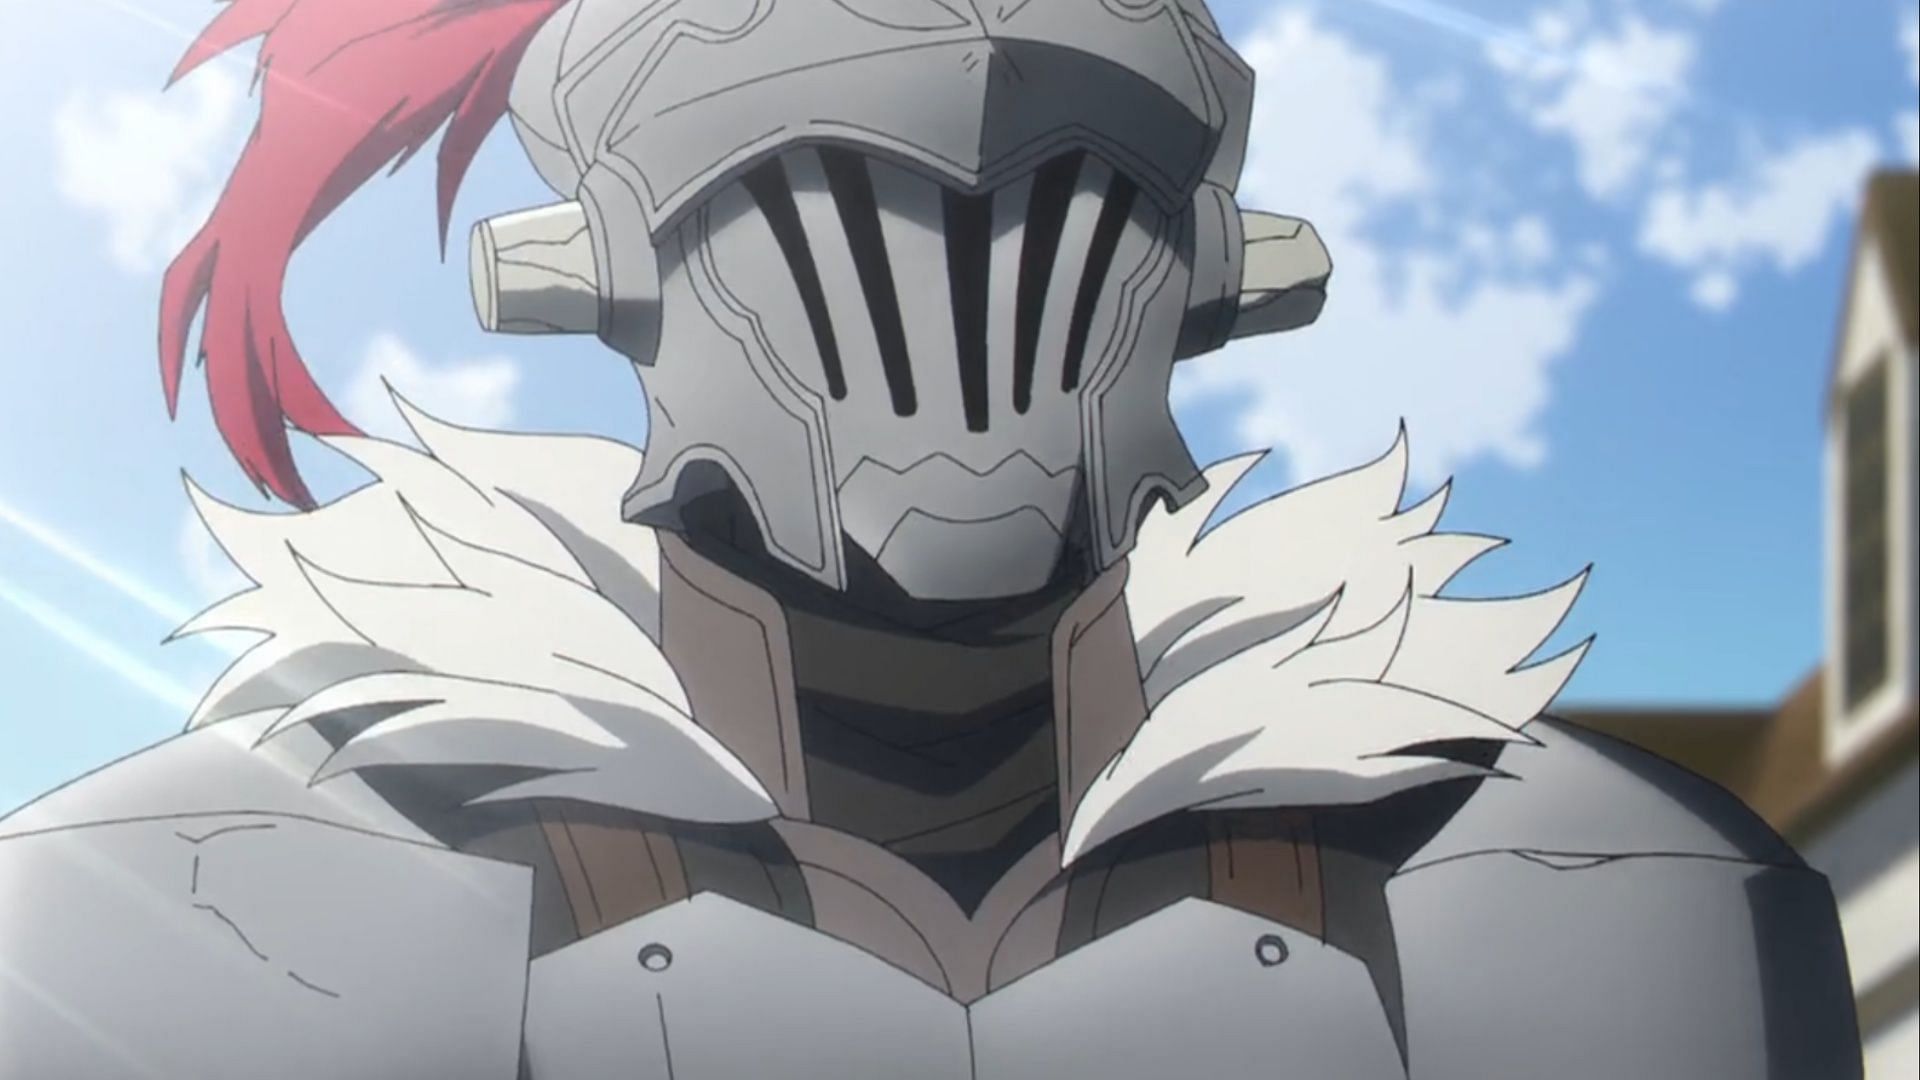 10 manga to read for fans of Goblin Slayer